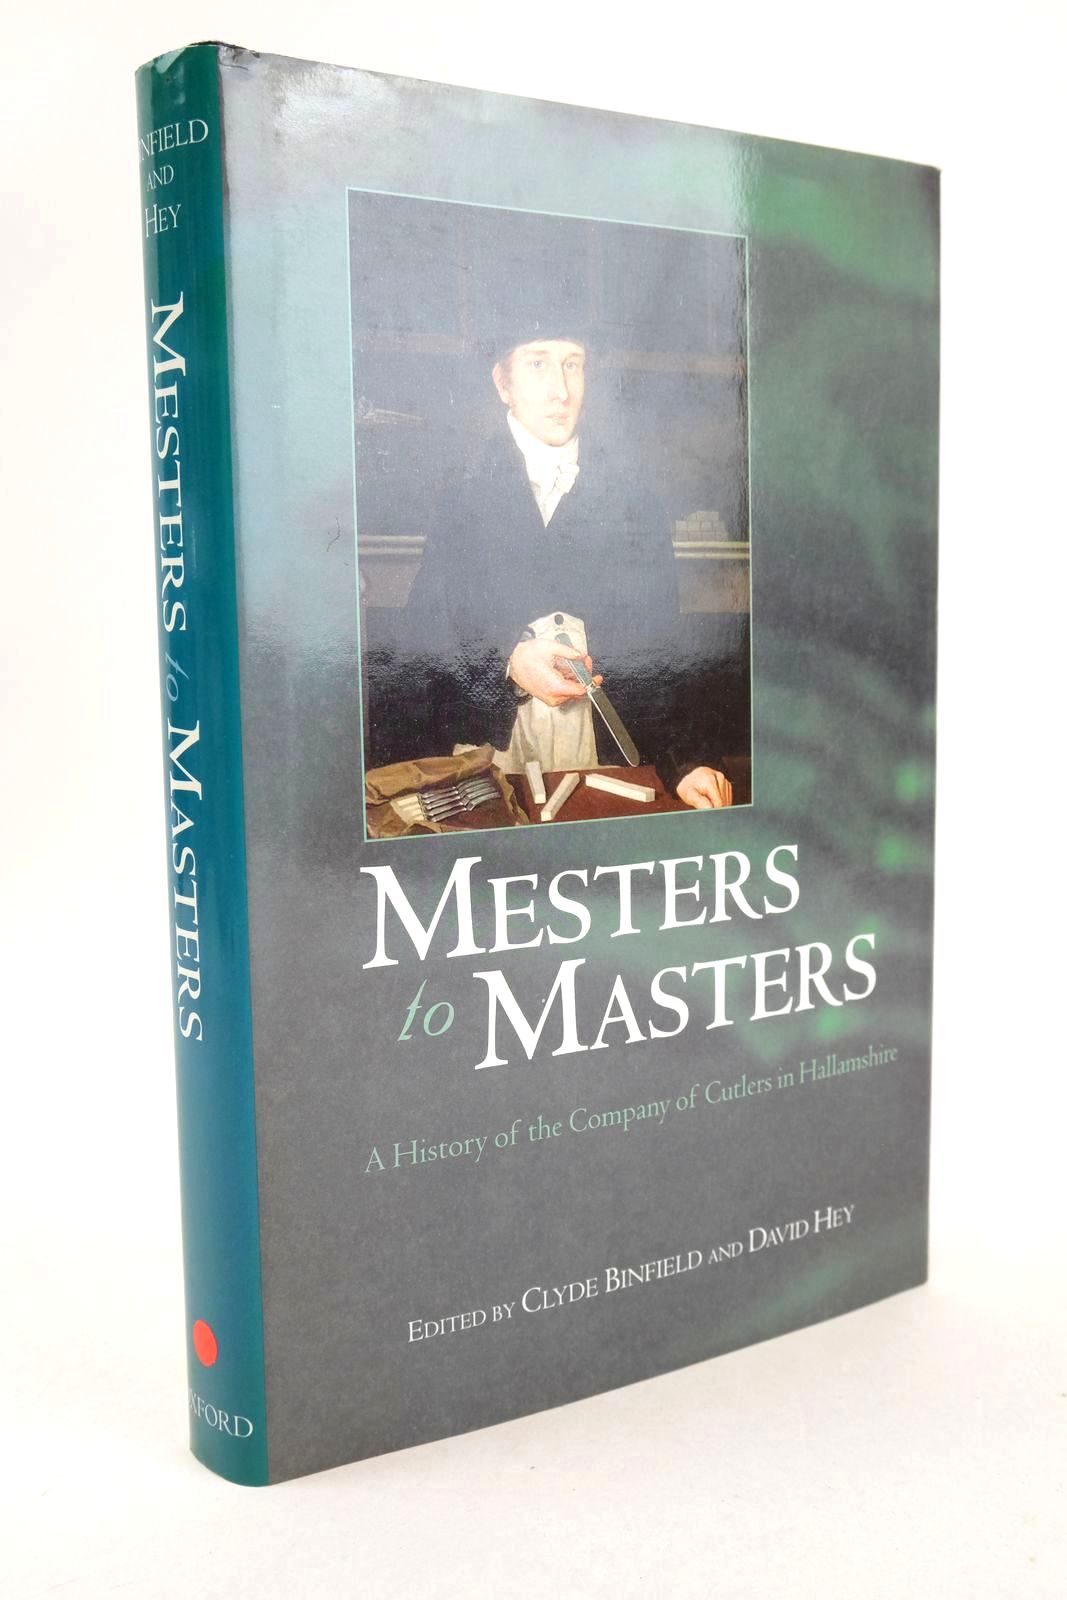 Photo of MESTERS TO MASTERS A HISTORY OF THE COMPANY OF CUTLERS IN HALLAMSHIRE written by Binfield, Clyde Hey, David published by Oxford University Press (STOCK CODE: 1326498)  for sale by Stella & Rose's Books